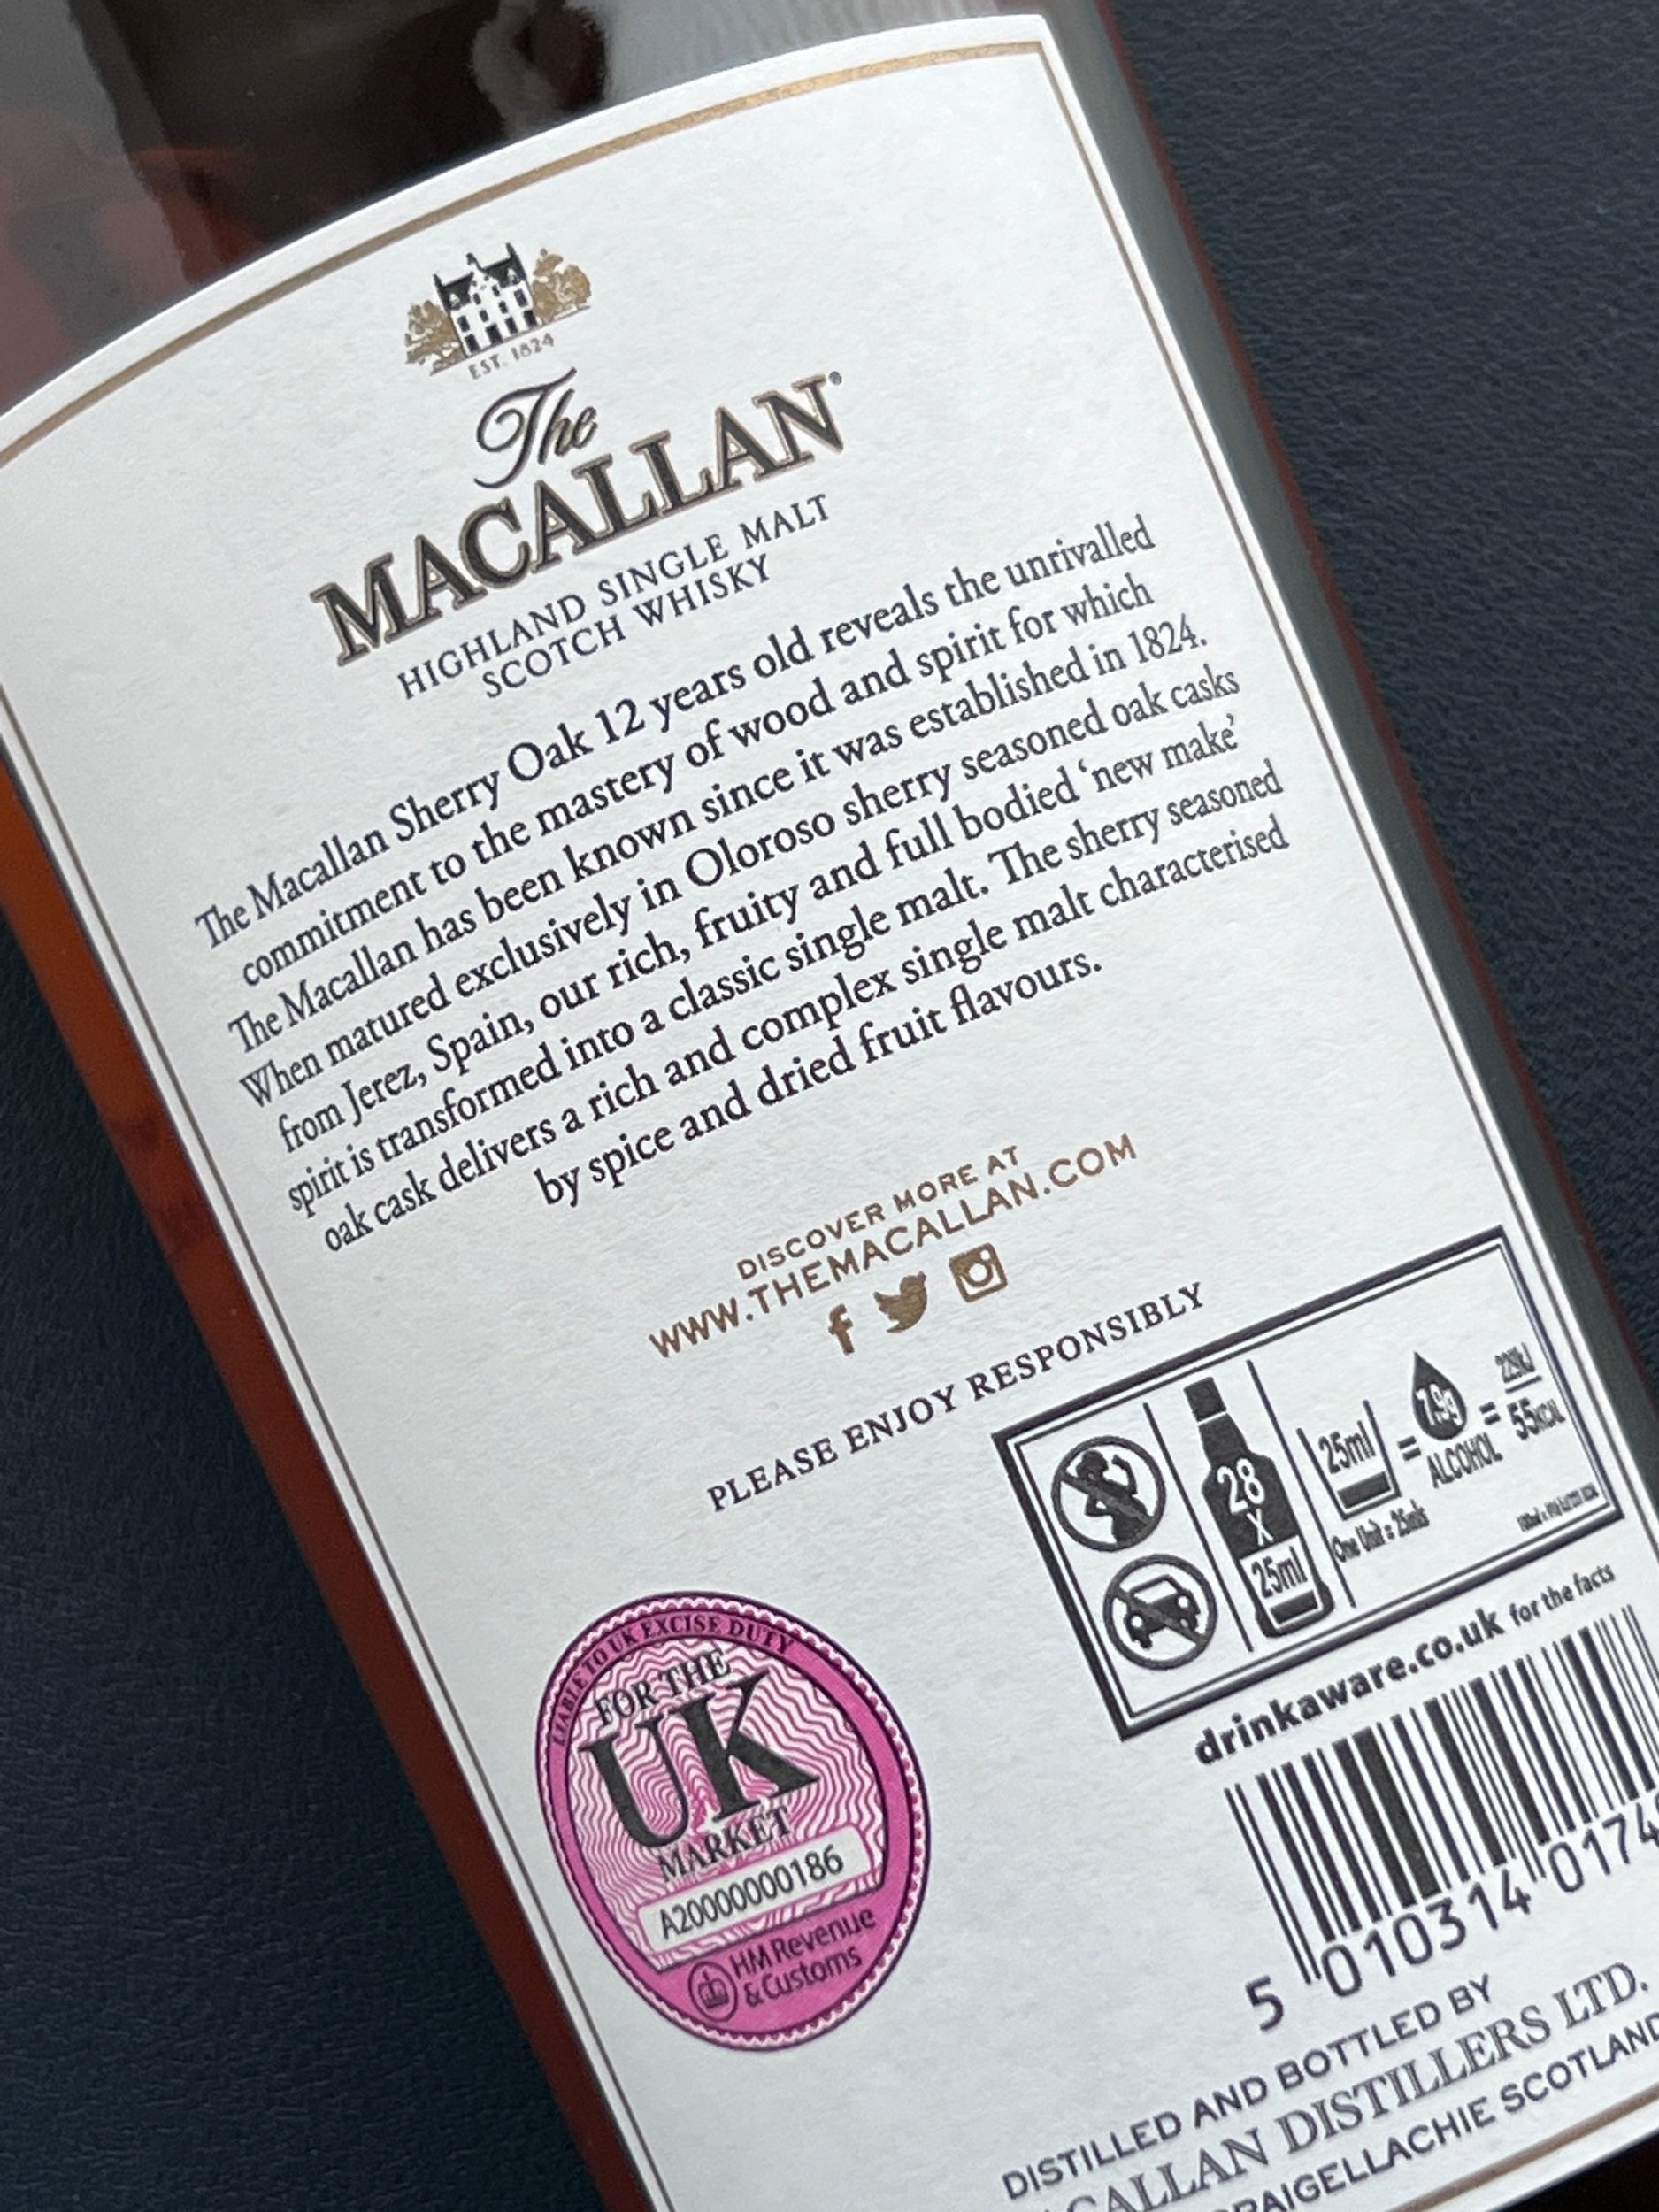 Macallan Opens Its First Ever Southeast Asia Boutique At The Spot